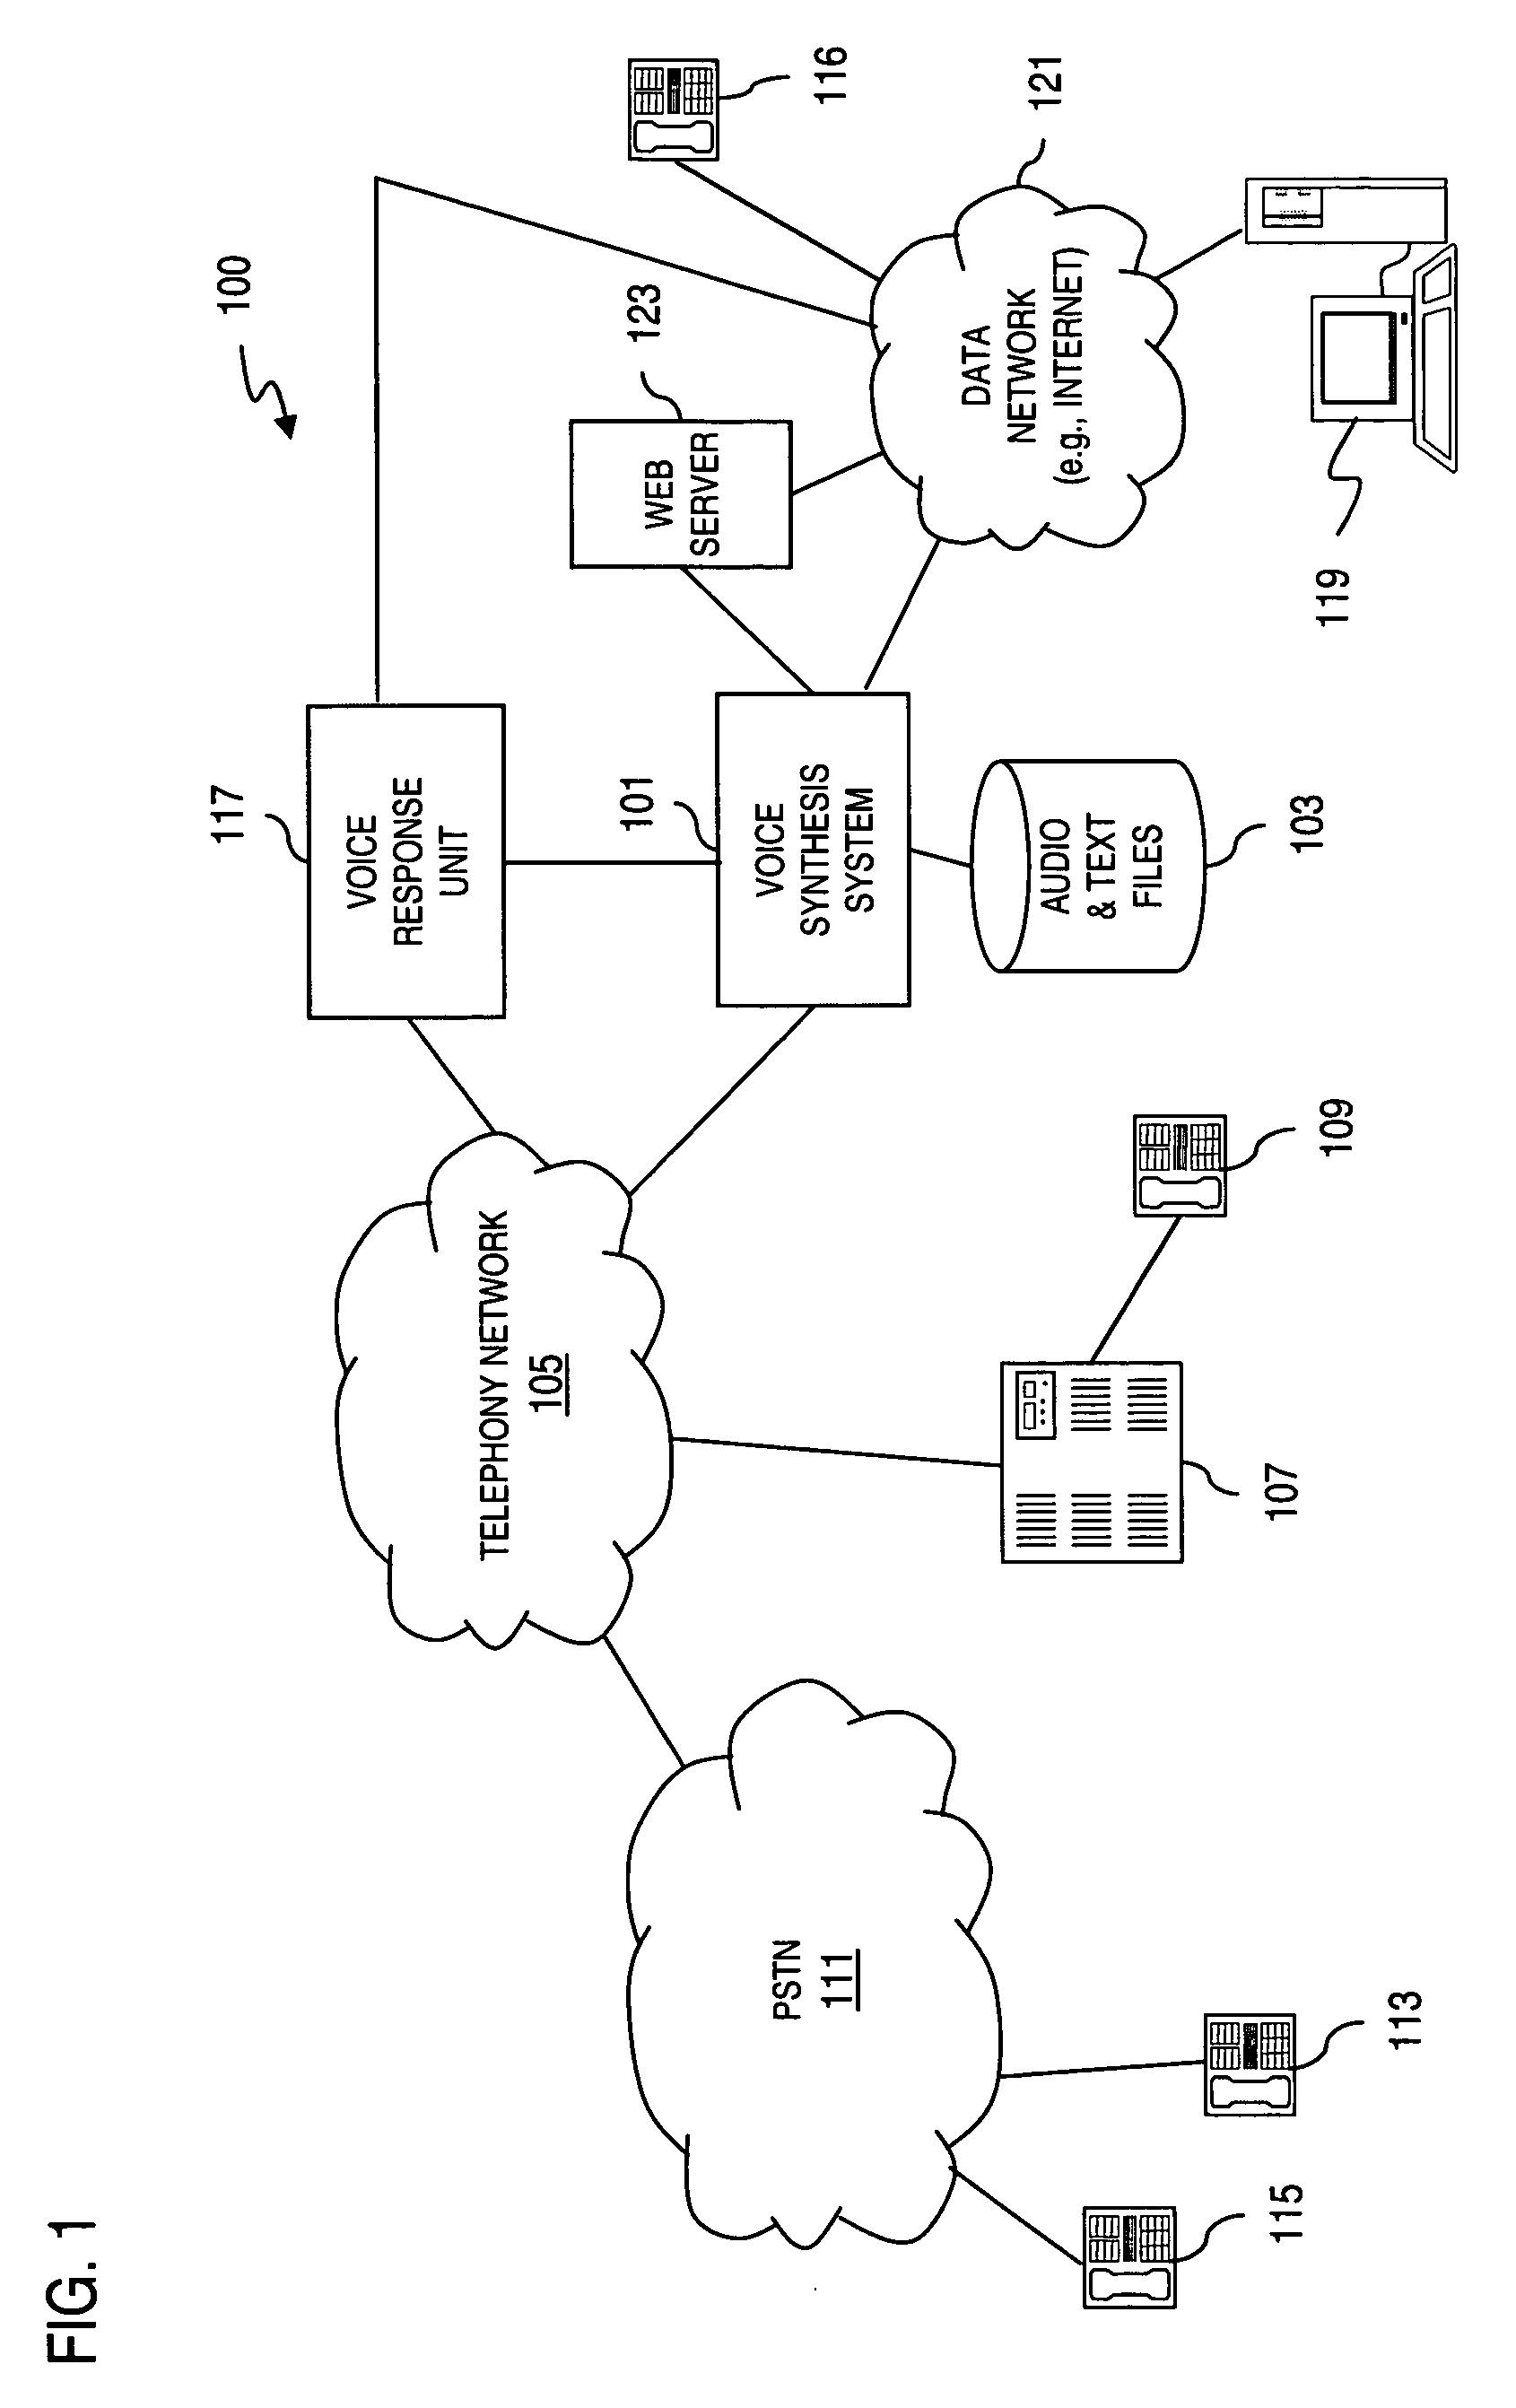 Method and system for providing synthesized speech